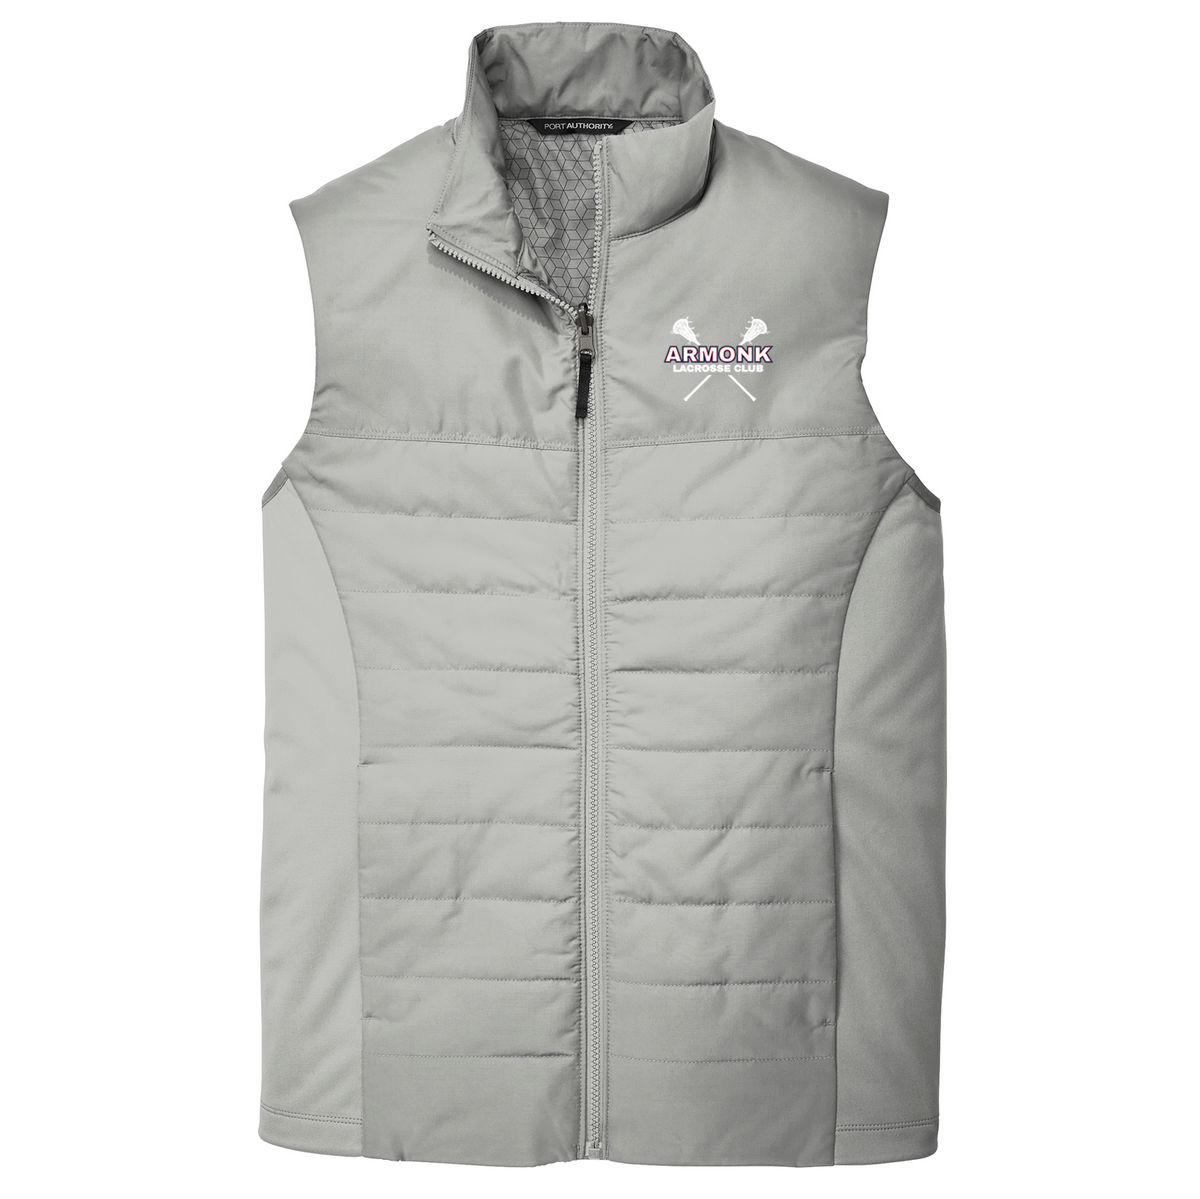 Armonk Lacrosse Club Collective Insulated Vest (Adult Only)